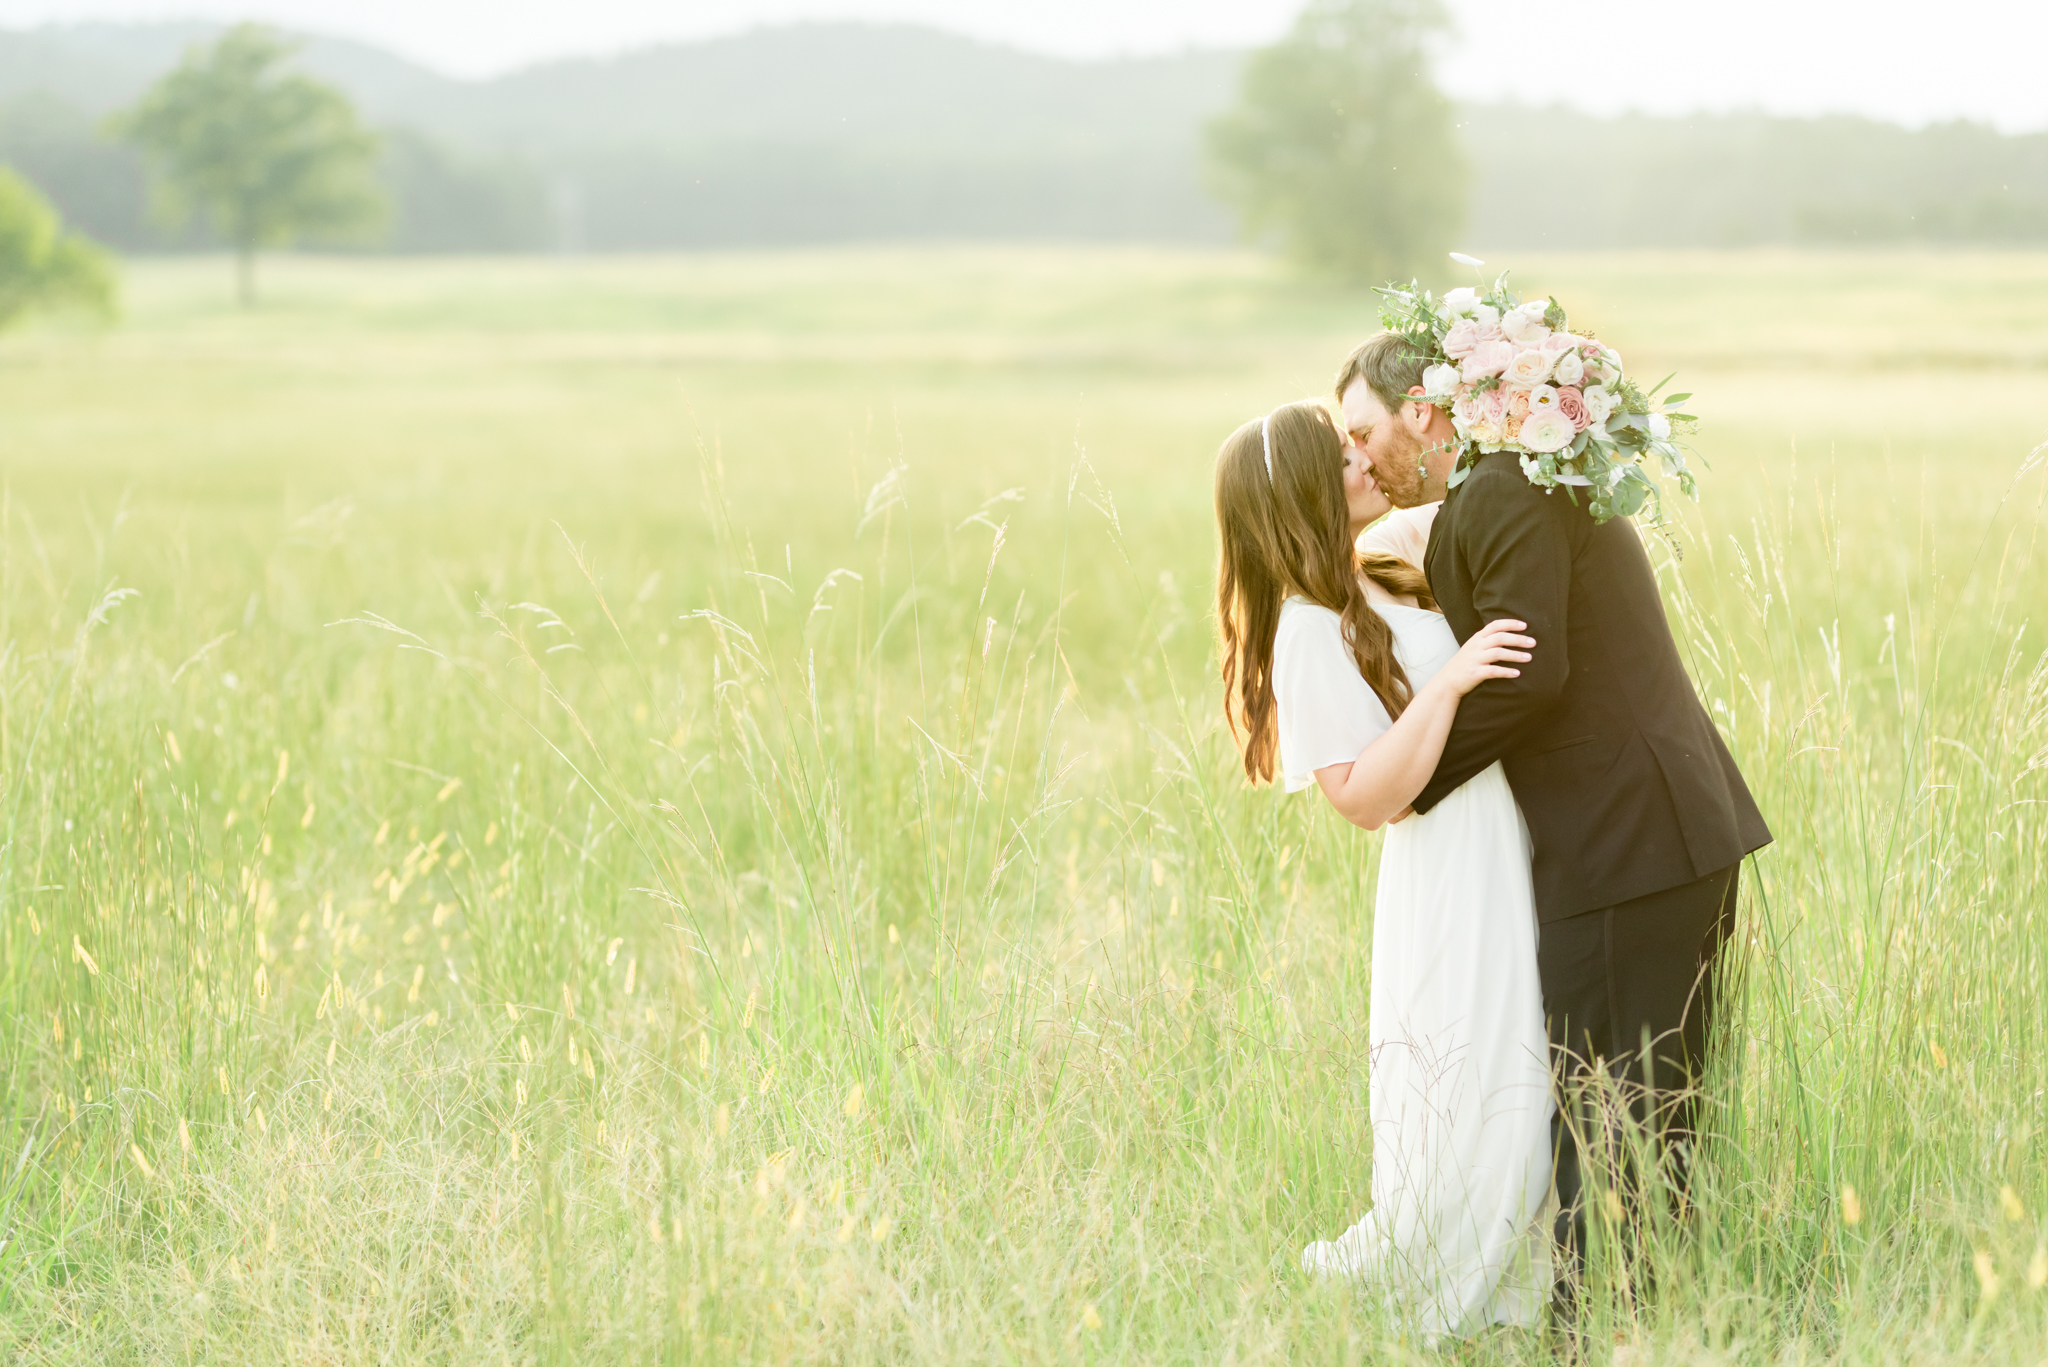 Bride and groom kiss at sunset in field.